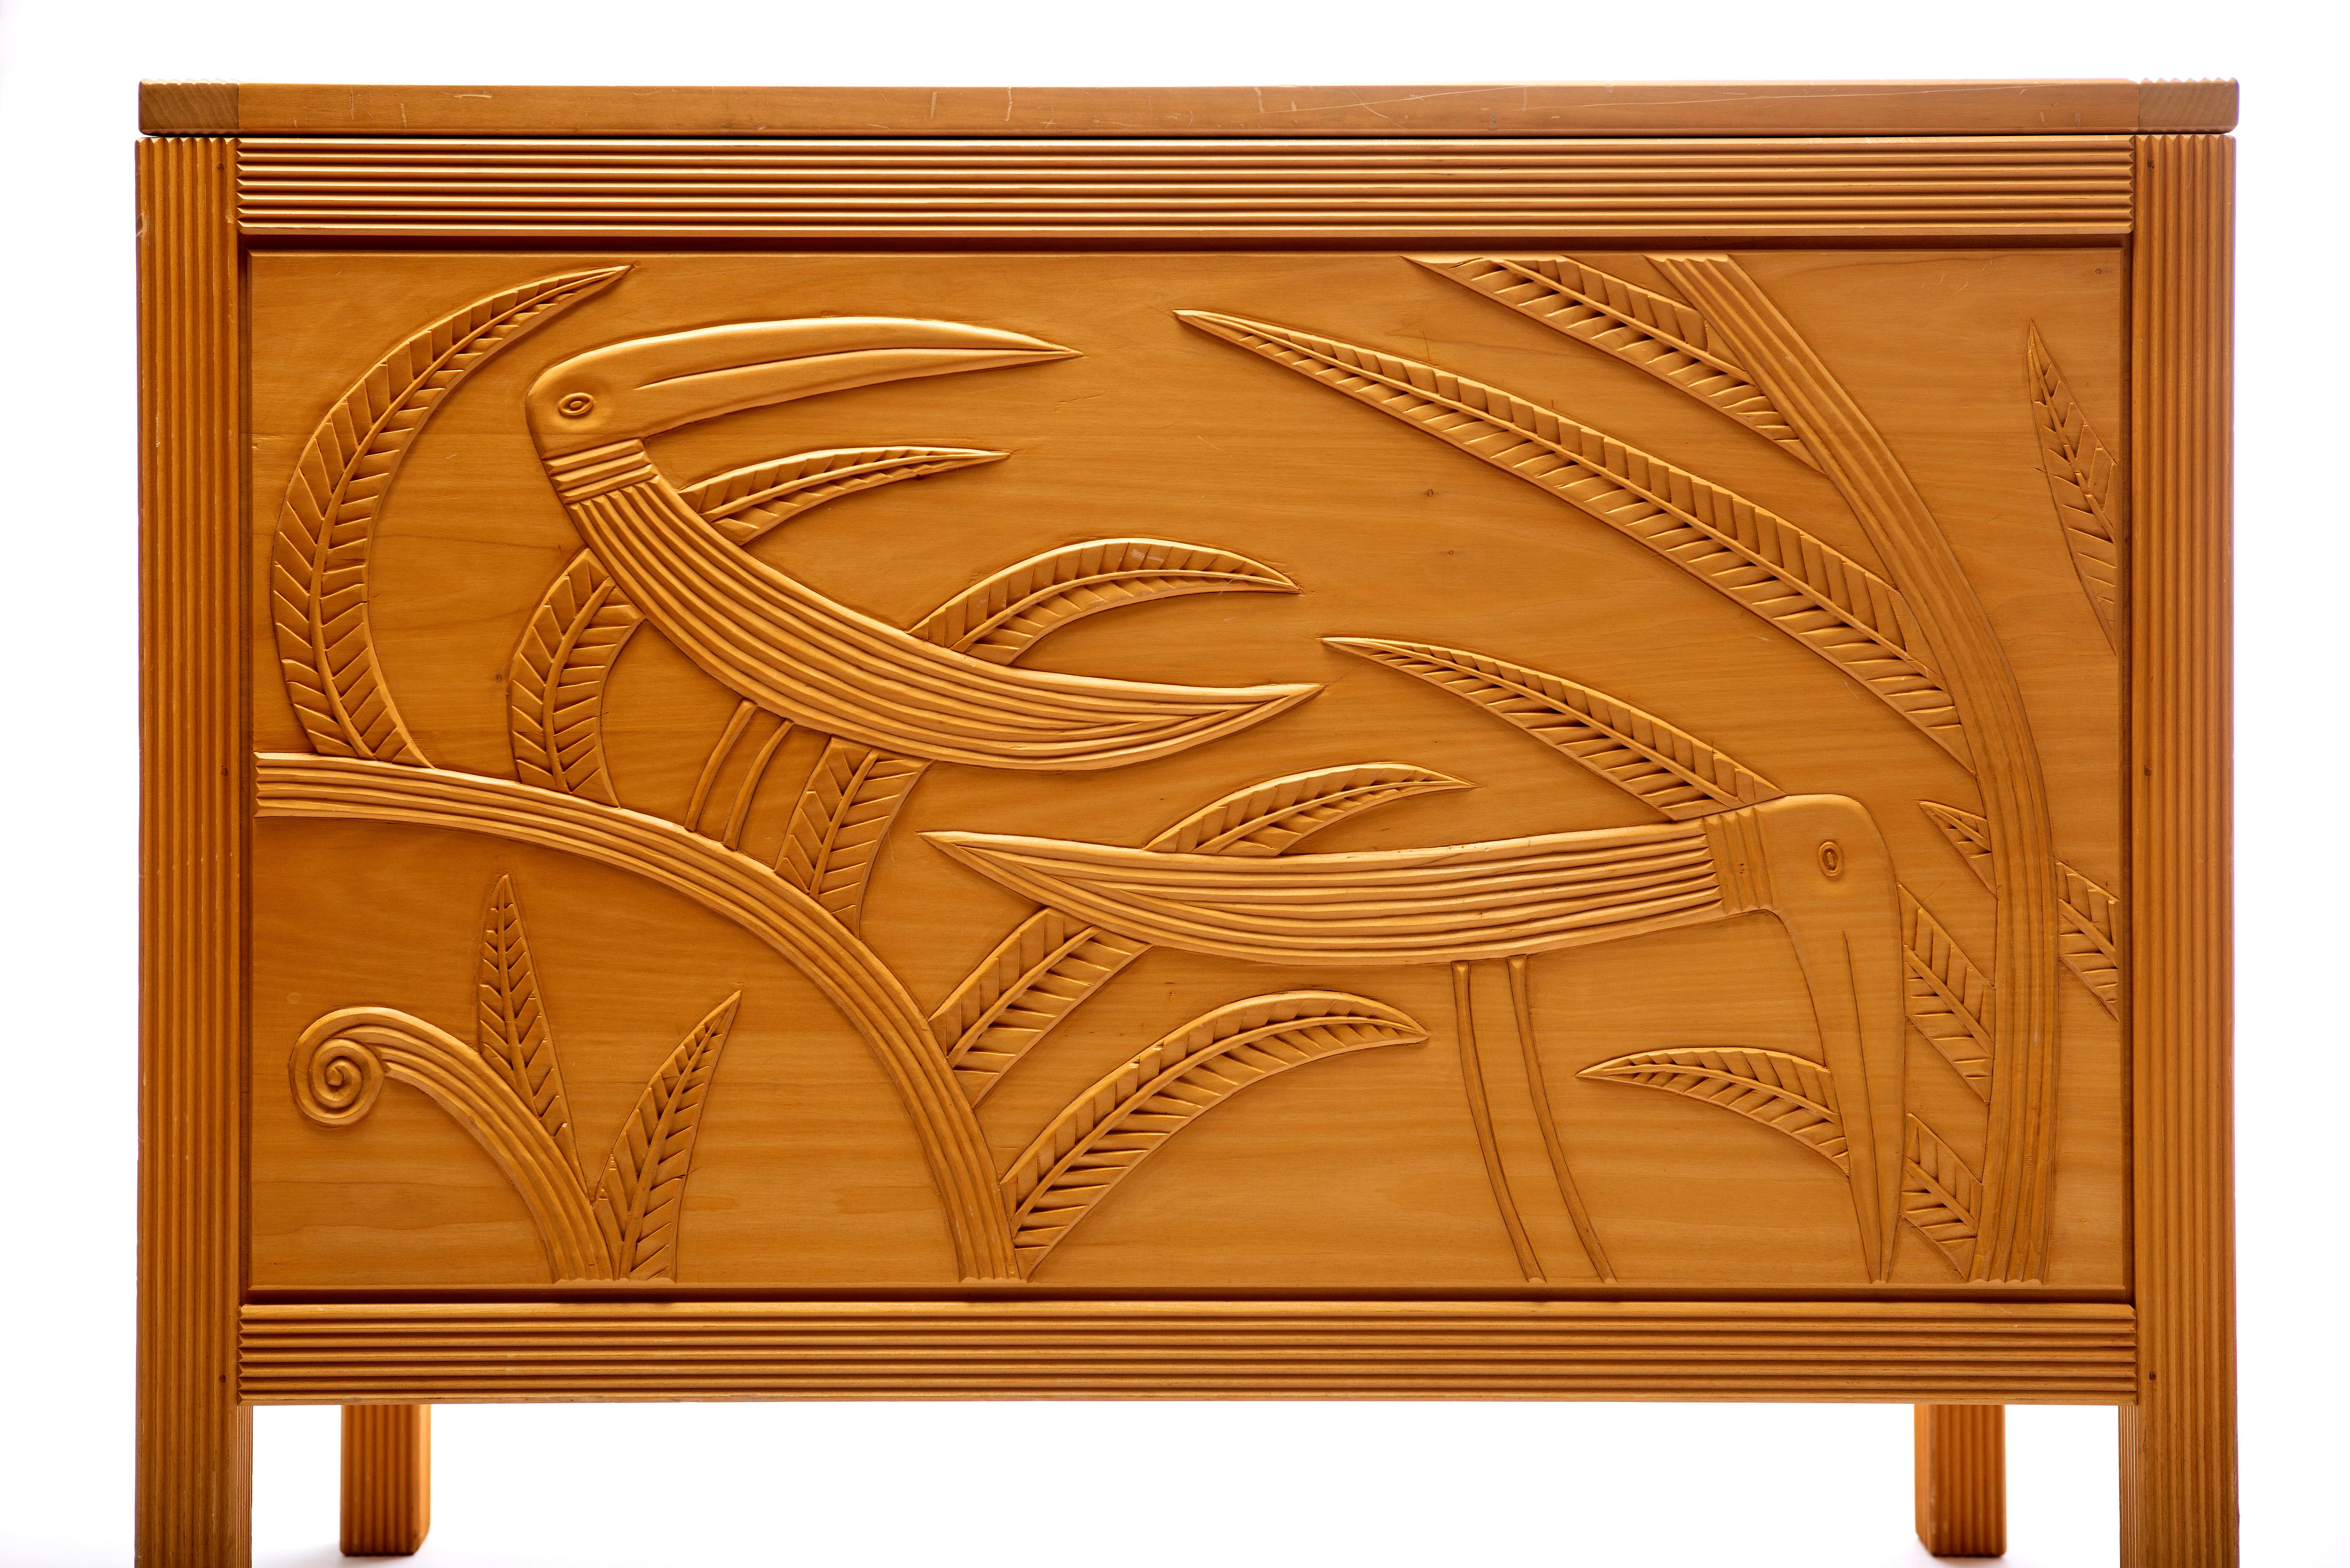 Judy Kensley McKie
Studio Furniture Chest, 1980
Basswood hinged top with relief-carved bird and leaf design to top and sides, raised on four square legs
31 x 36 x 22 in
Signed JKM 1980